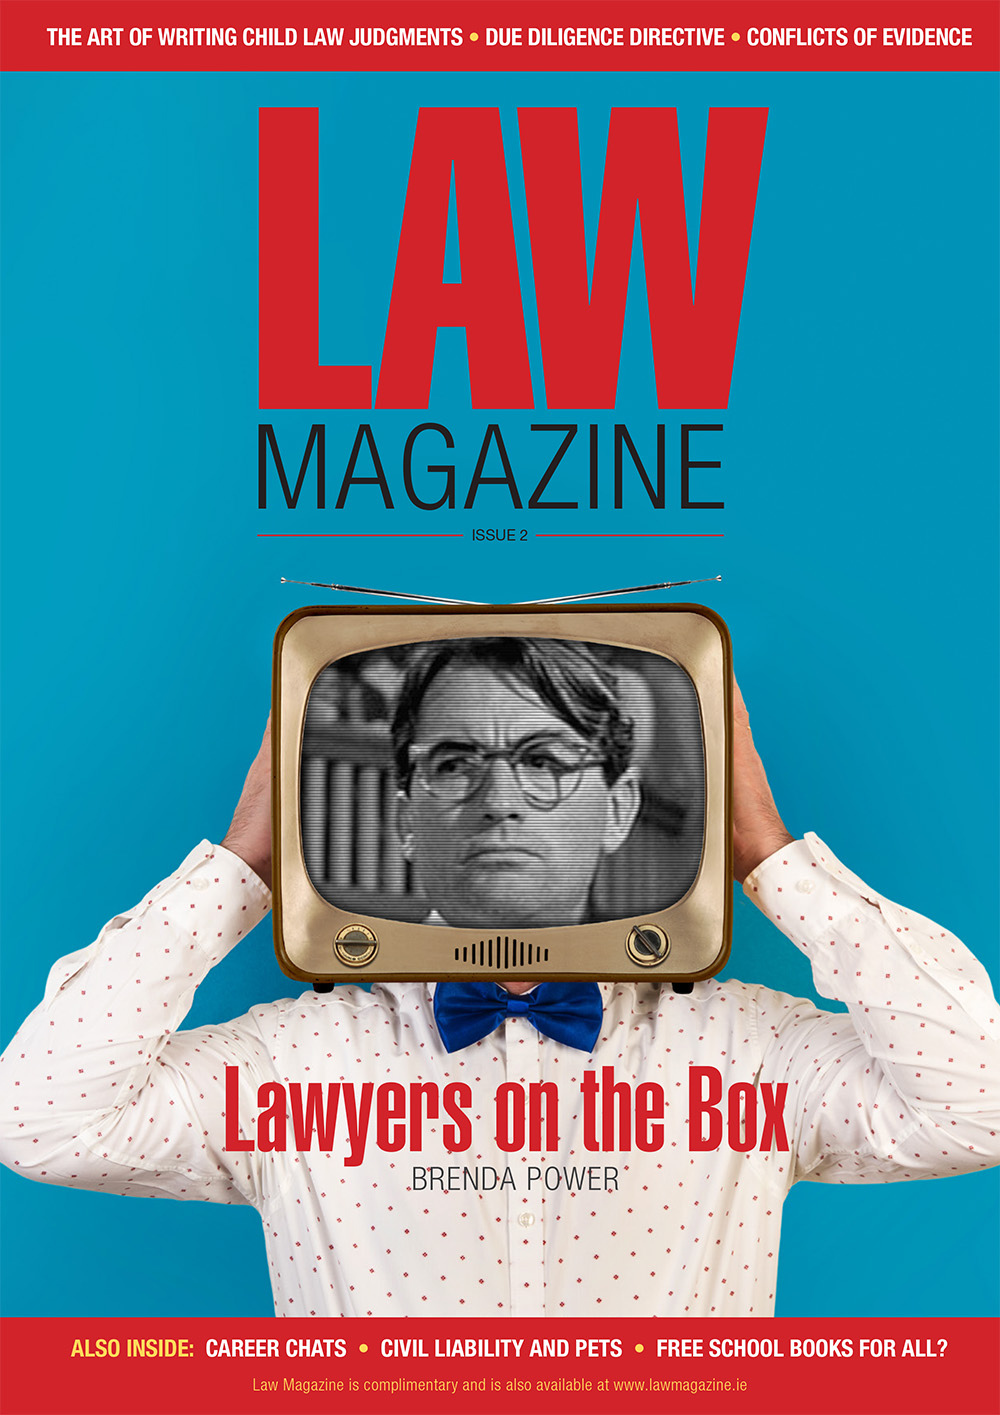 Law Magazine's second issue now available online